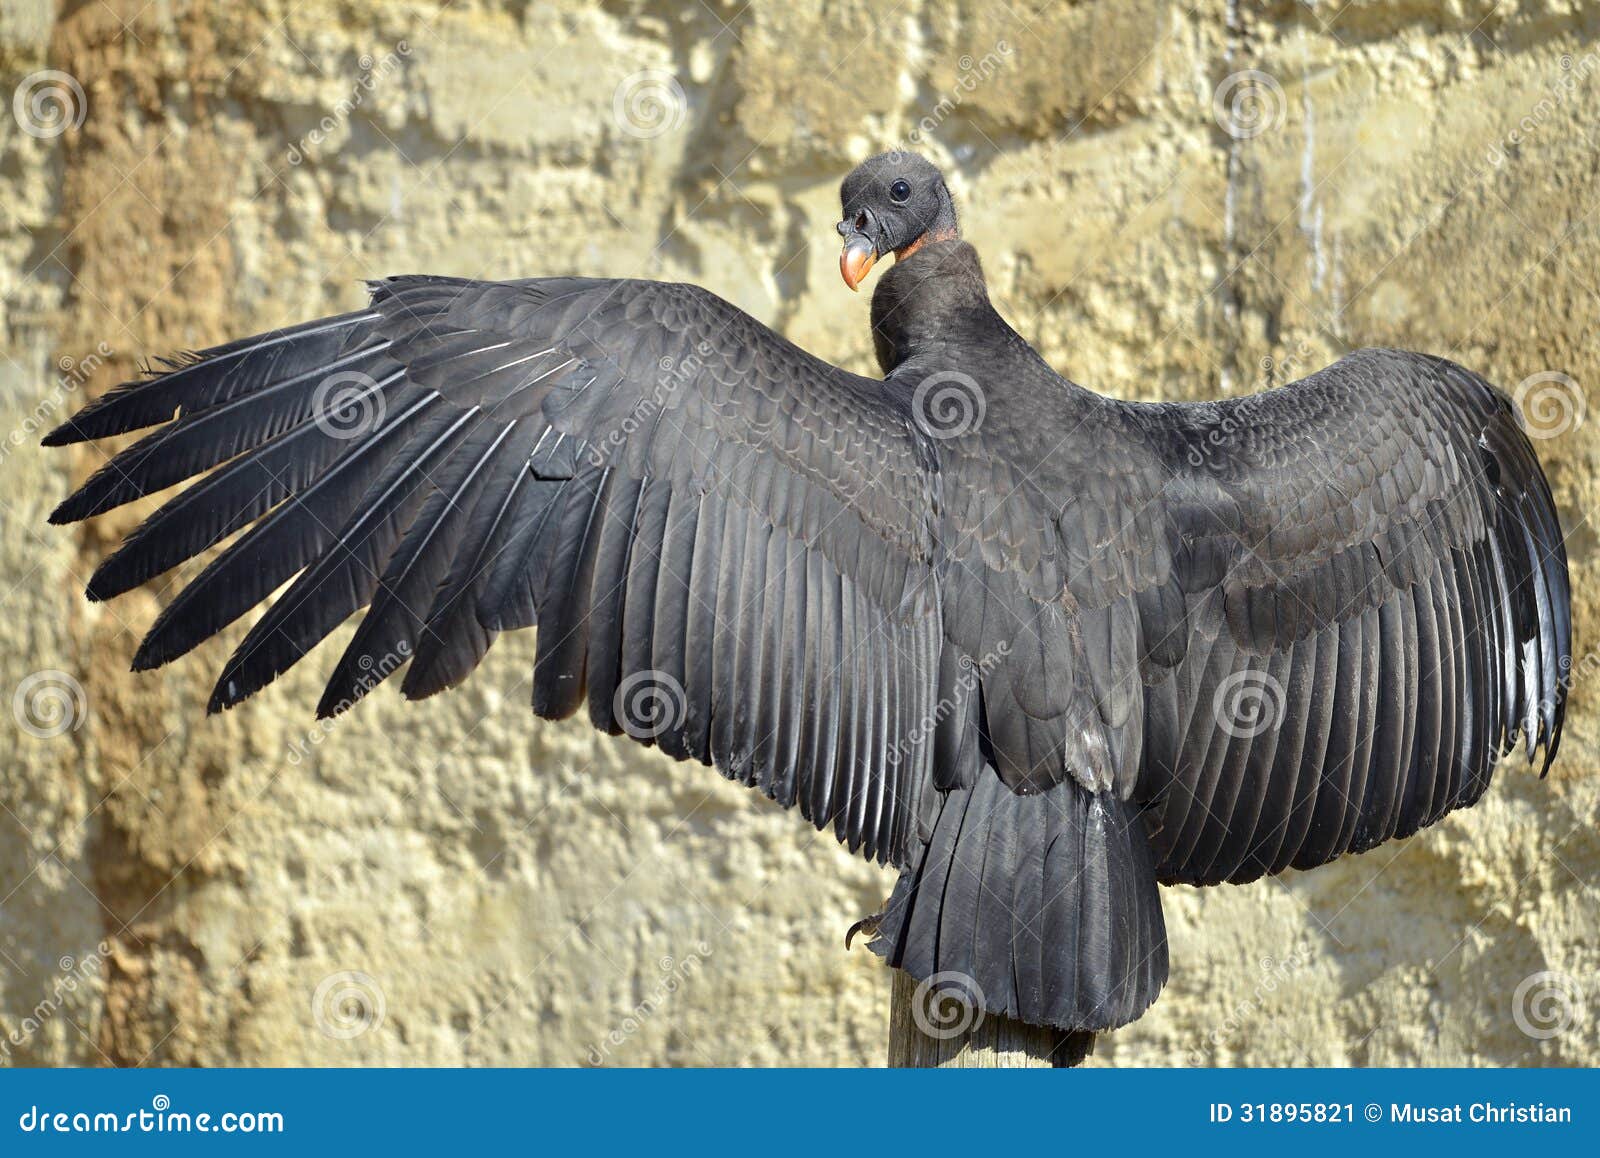 juvenile king vulture outspread wings